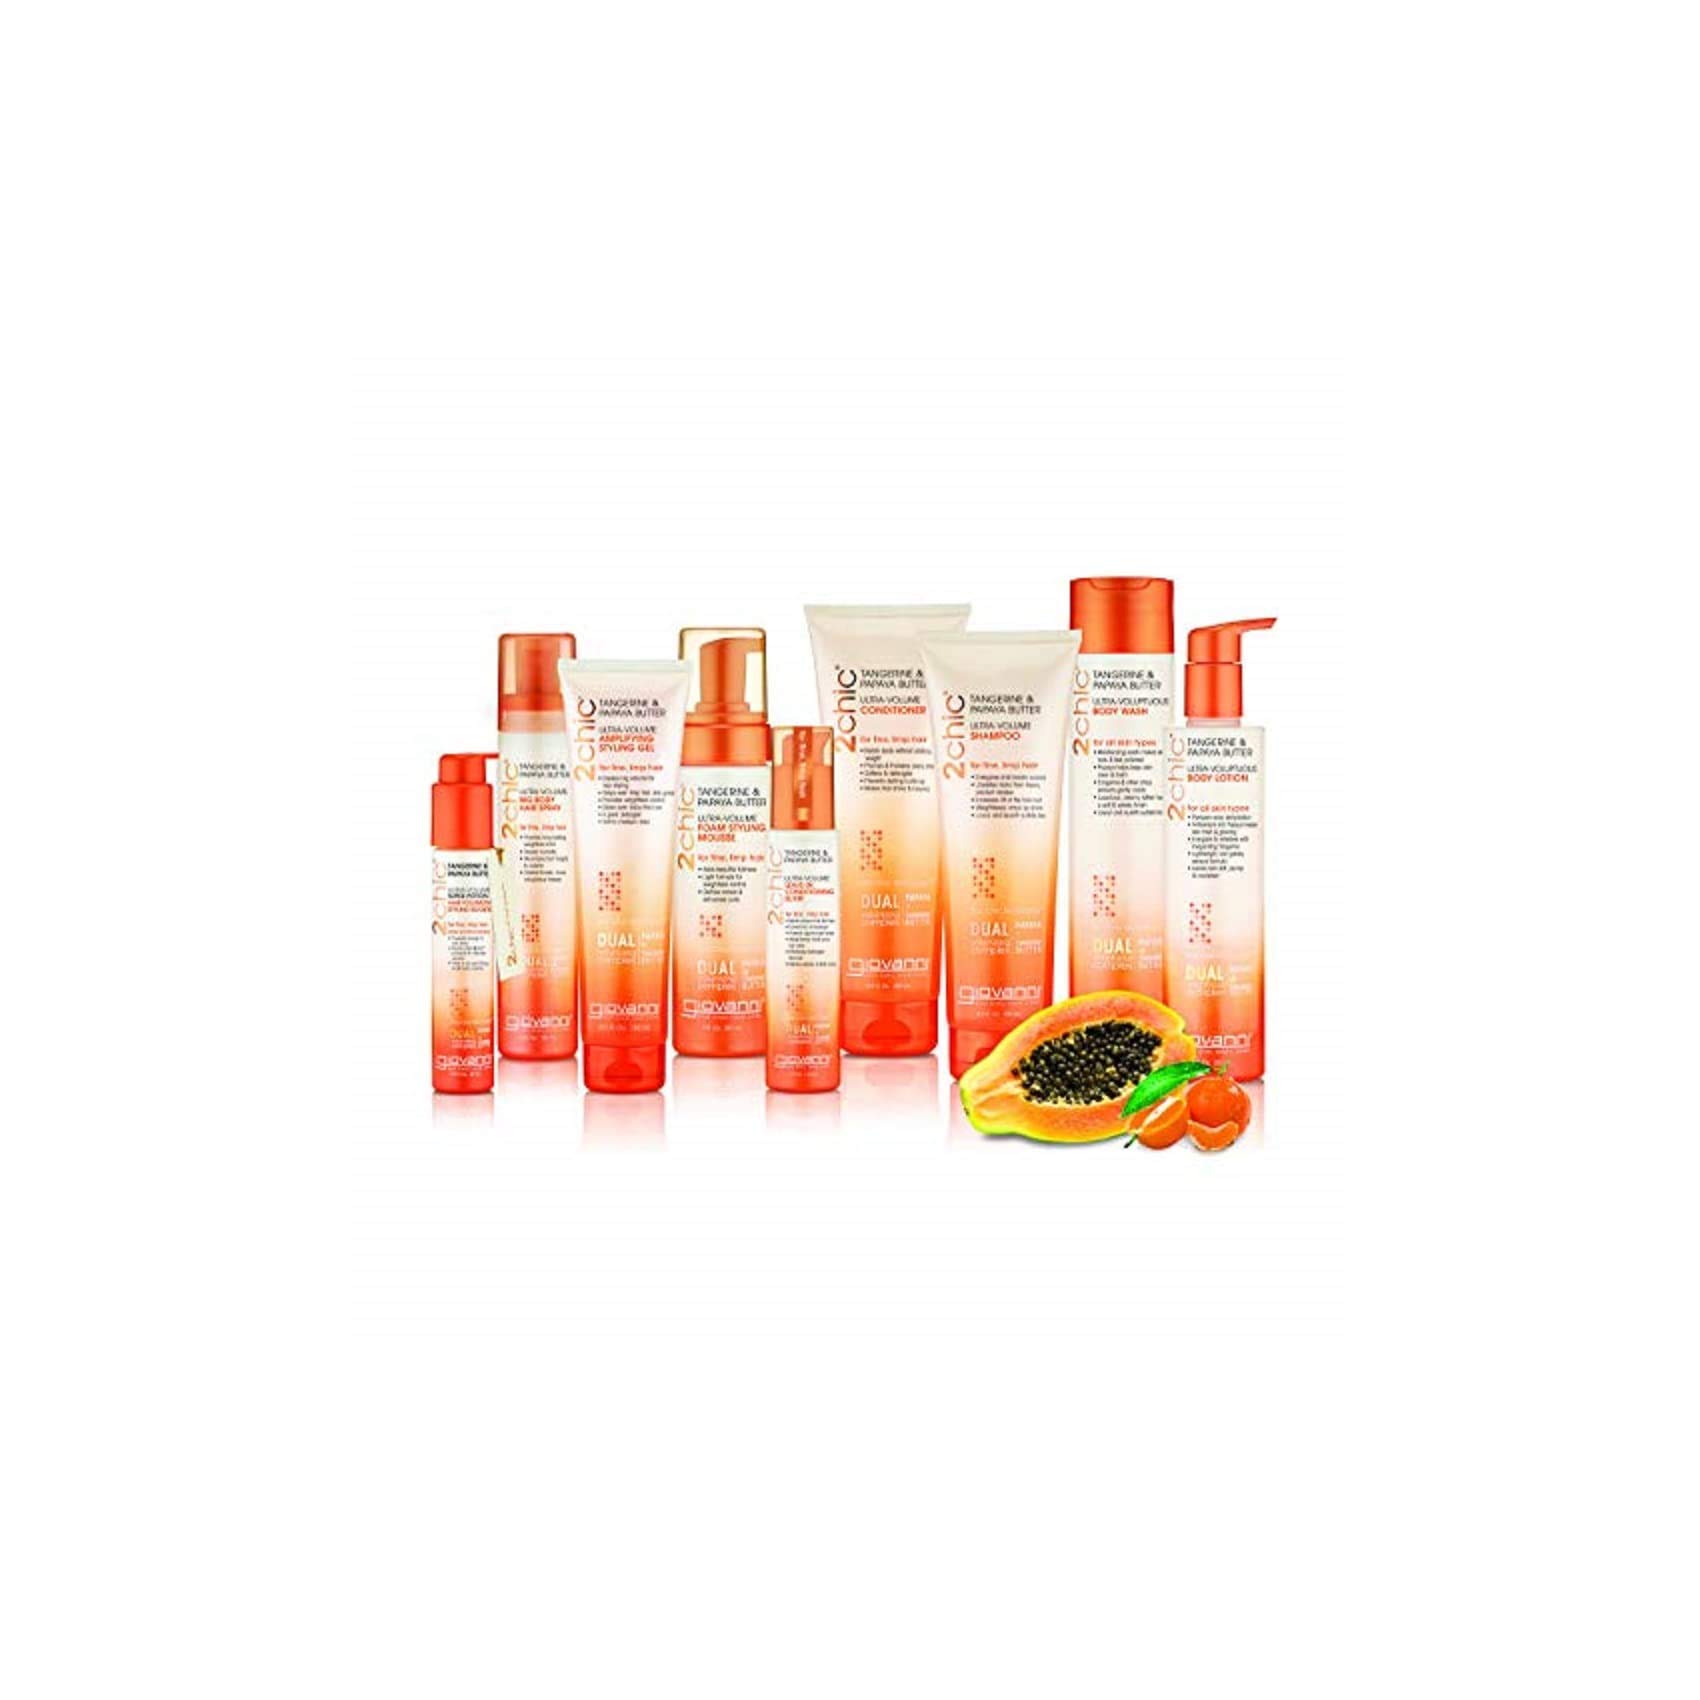 GIOVANNI 2chic Ultra-Volume Conditioner, 8.5oz. - Daily Volumizing Formula with Papaya & Tangerine Butter, Promotes Weightless Control for Fine Limp Thin Hair, No Parabens, Color Safe